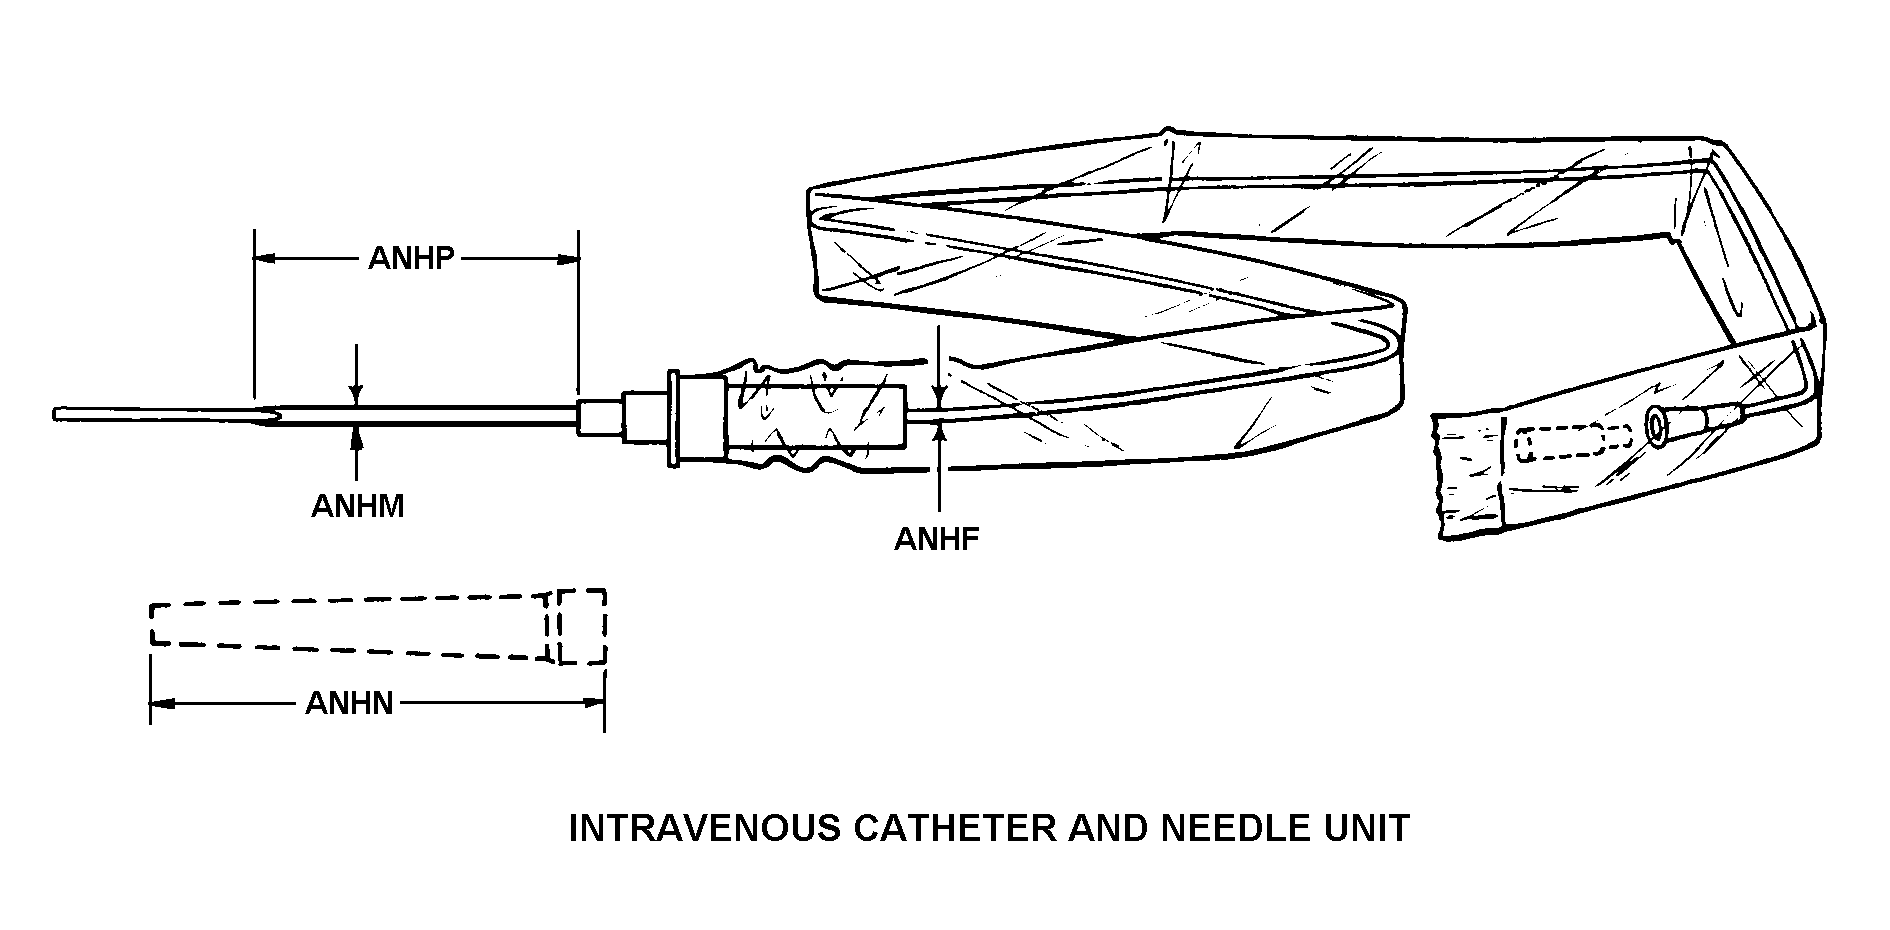 INTRAVENOUS CATHETER AND NEEDLE UNIT style nsn 6515-01-463-4167